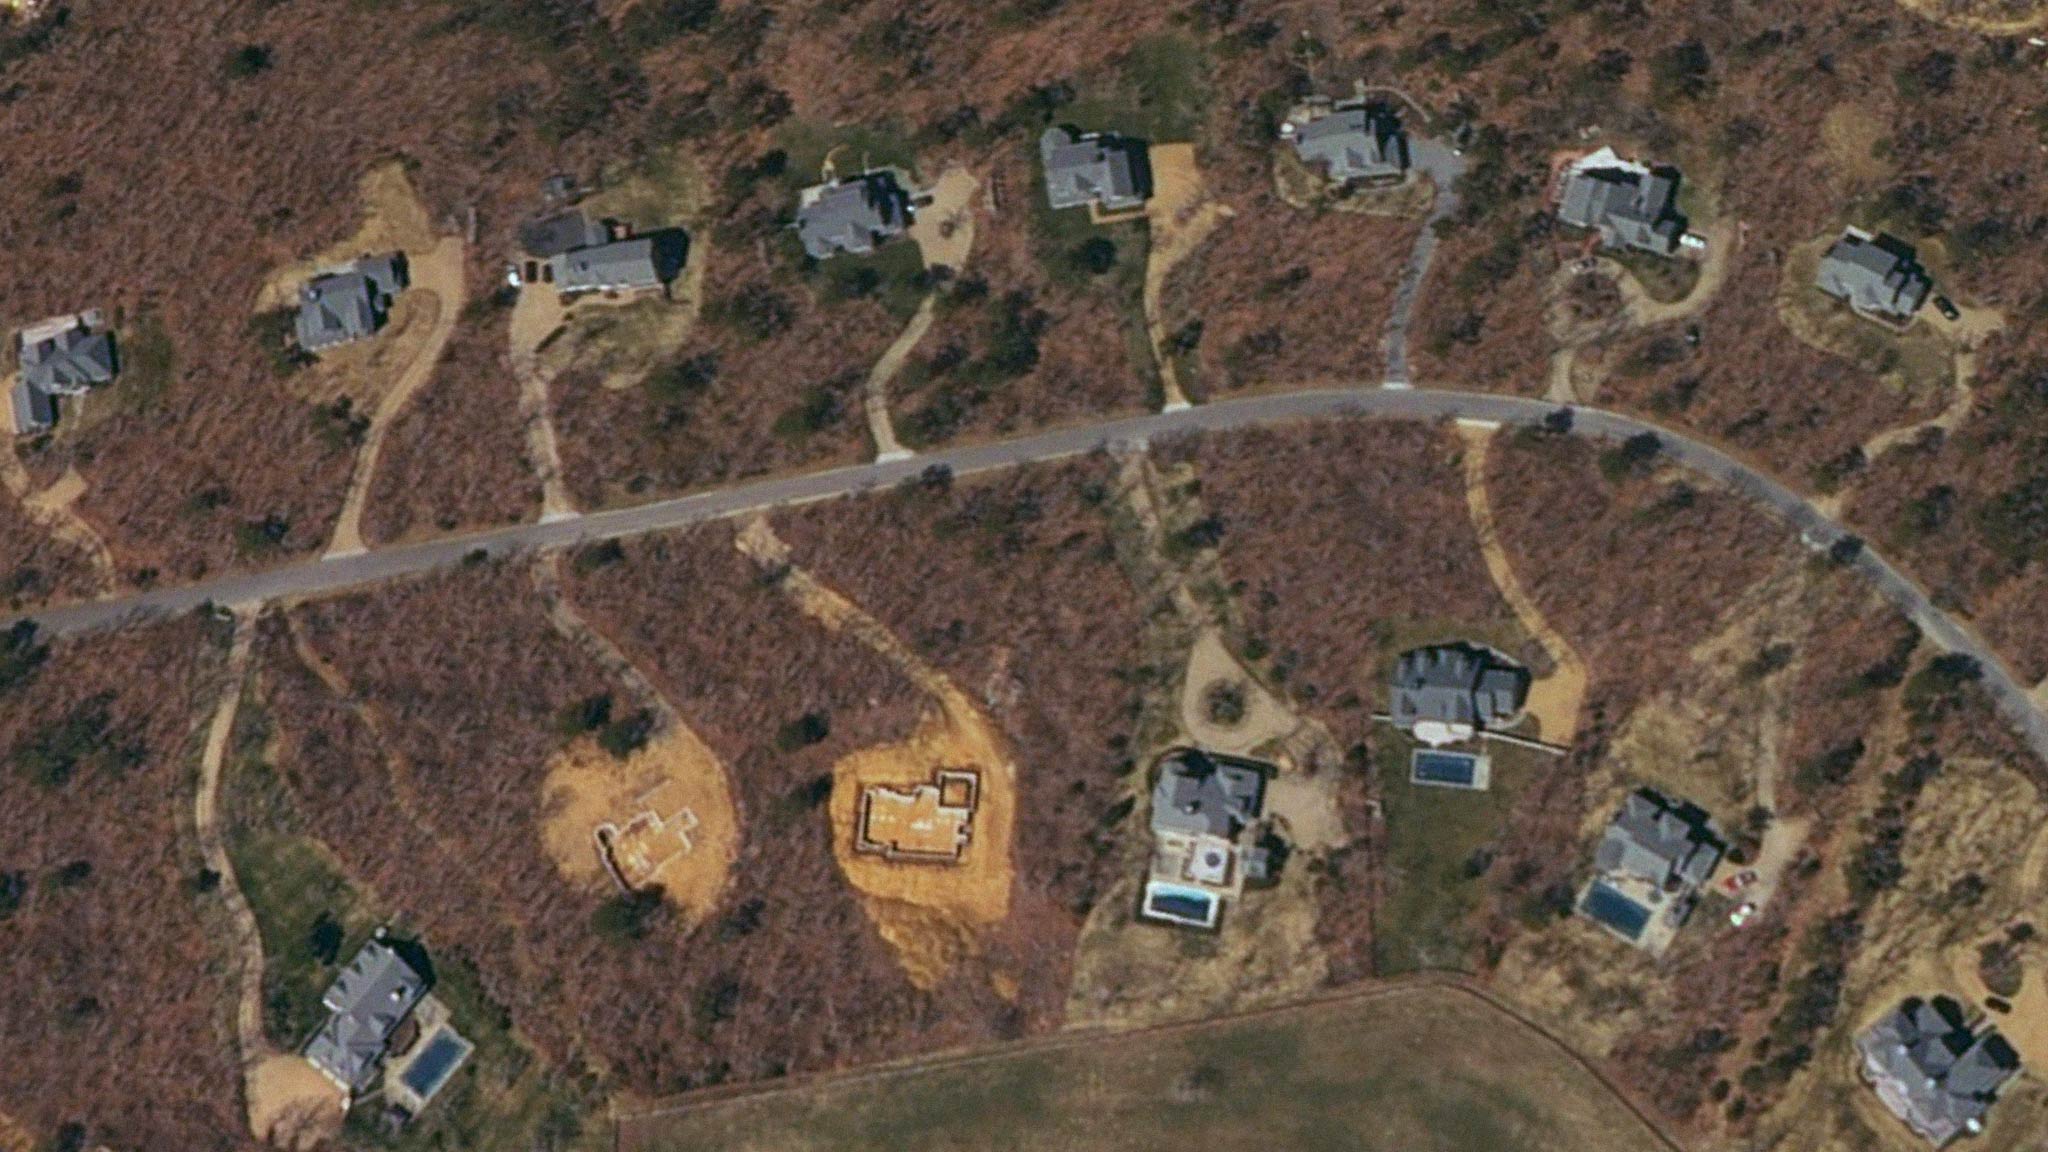 Martha's Vineyard satellite image from 2005 after mansions